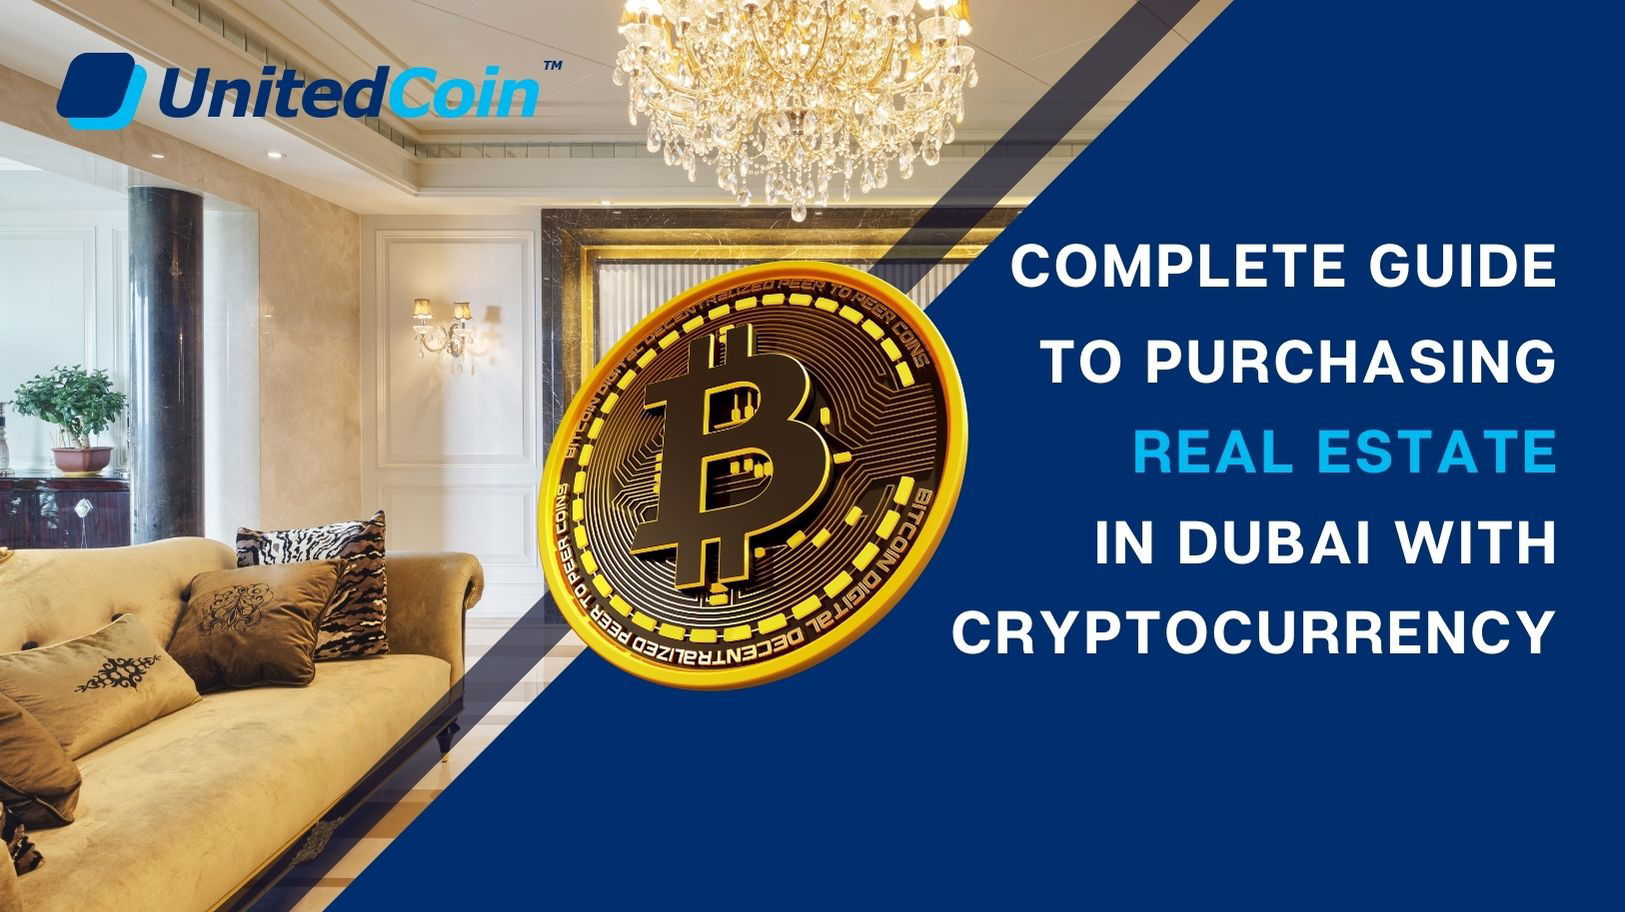 Complete Guide to Purchasing Real Estate in Dubai with Cryptocurrency